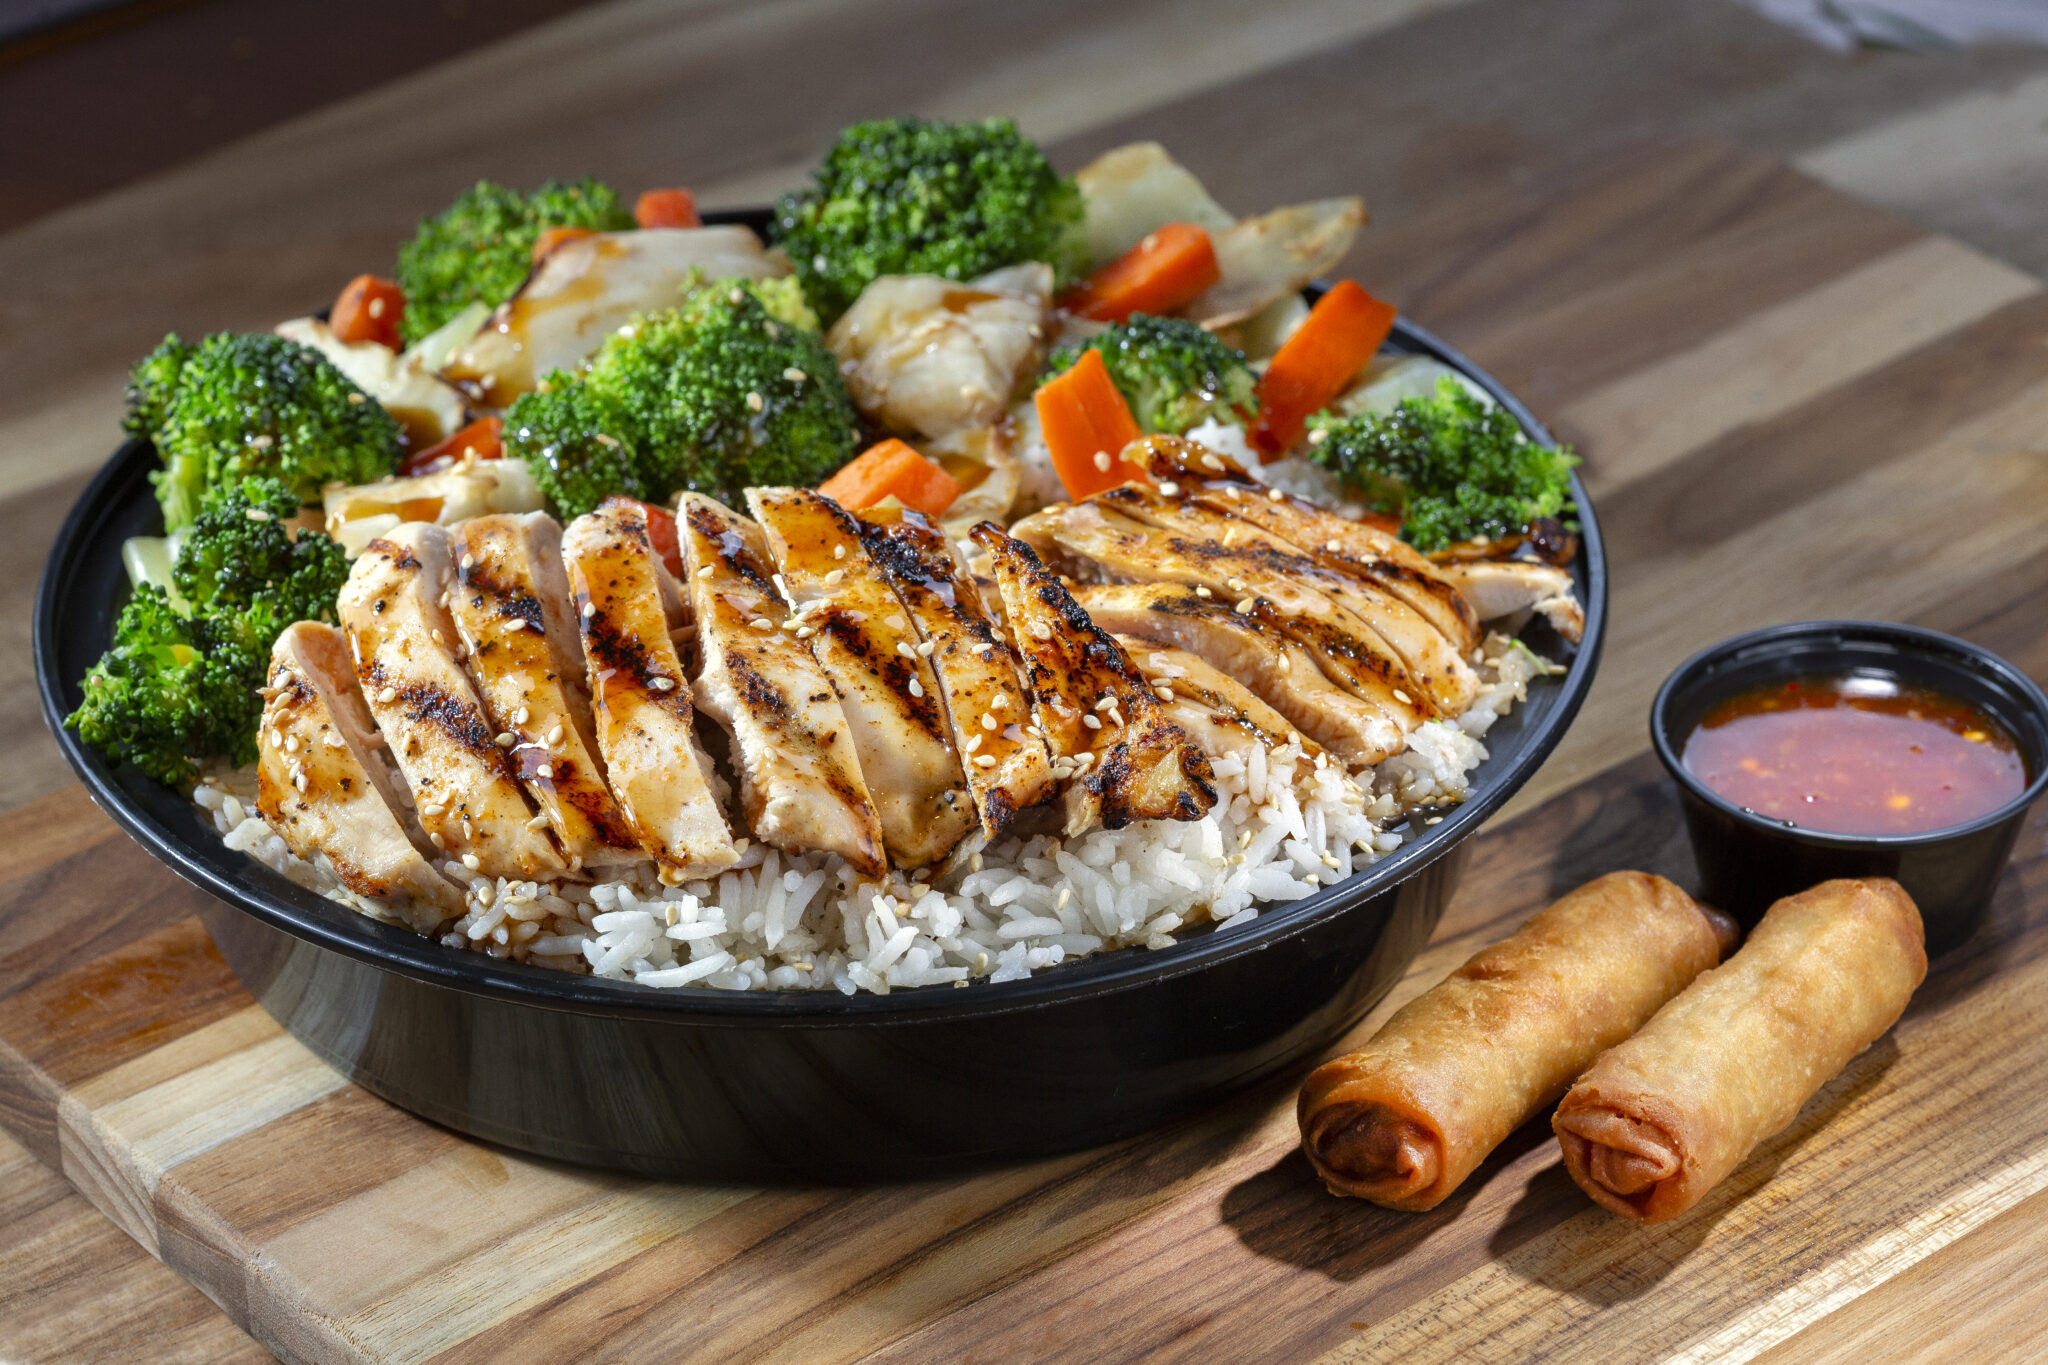 White Meat Chicken Teriyaki $17.99 Crispy chicken, savory teriyaki sauce, crisp broccoli, carrots and cabbage served over fluffy white rice. 1.5 lbs of deliciousness!